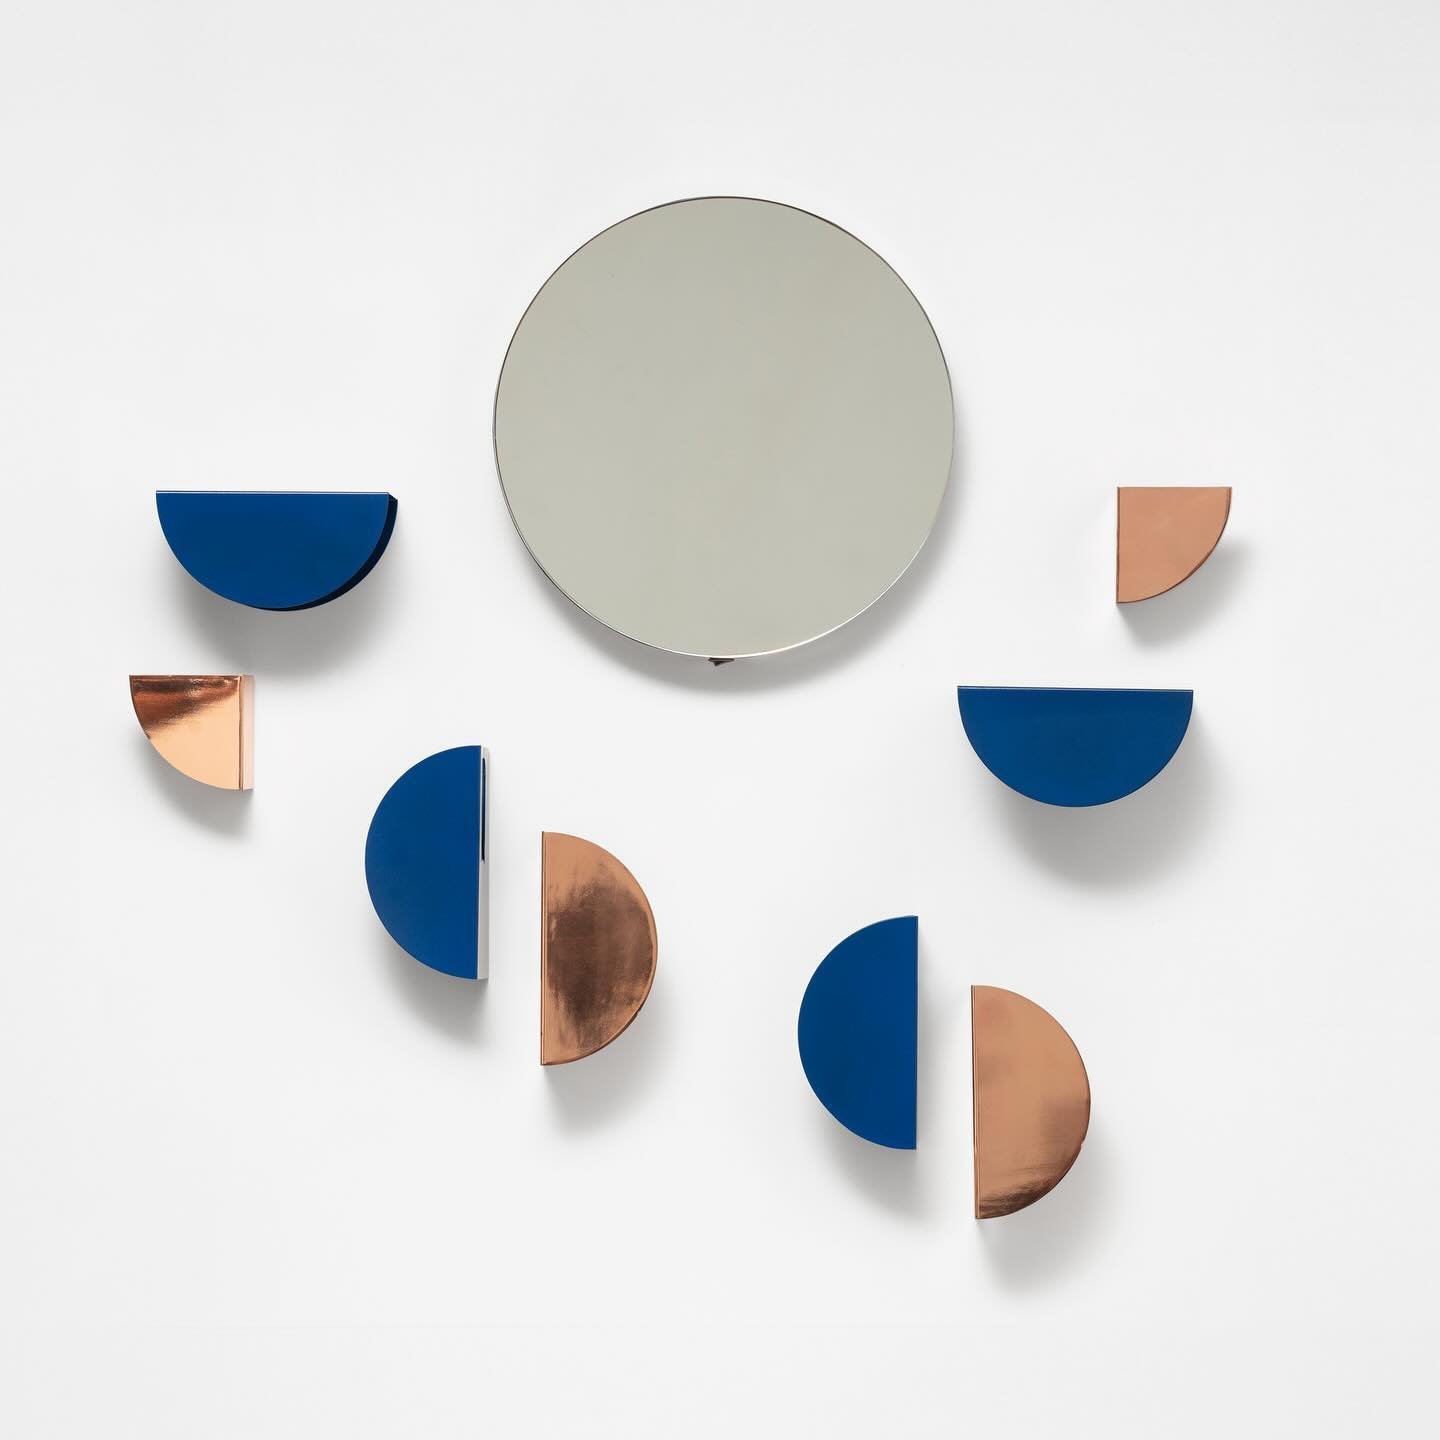 BIENVENIDA 

Bienvenida is a family of objects that has four main functions: mirror, key holder, coat rack and shelf. This set of objects is focused on creating a warm welcome when someone gets home through its composition, shapes and materials.

Pro